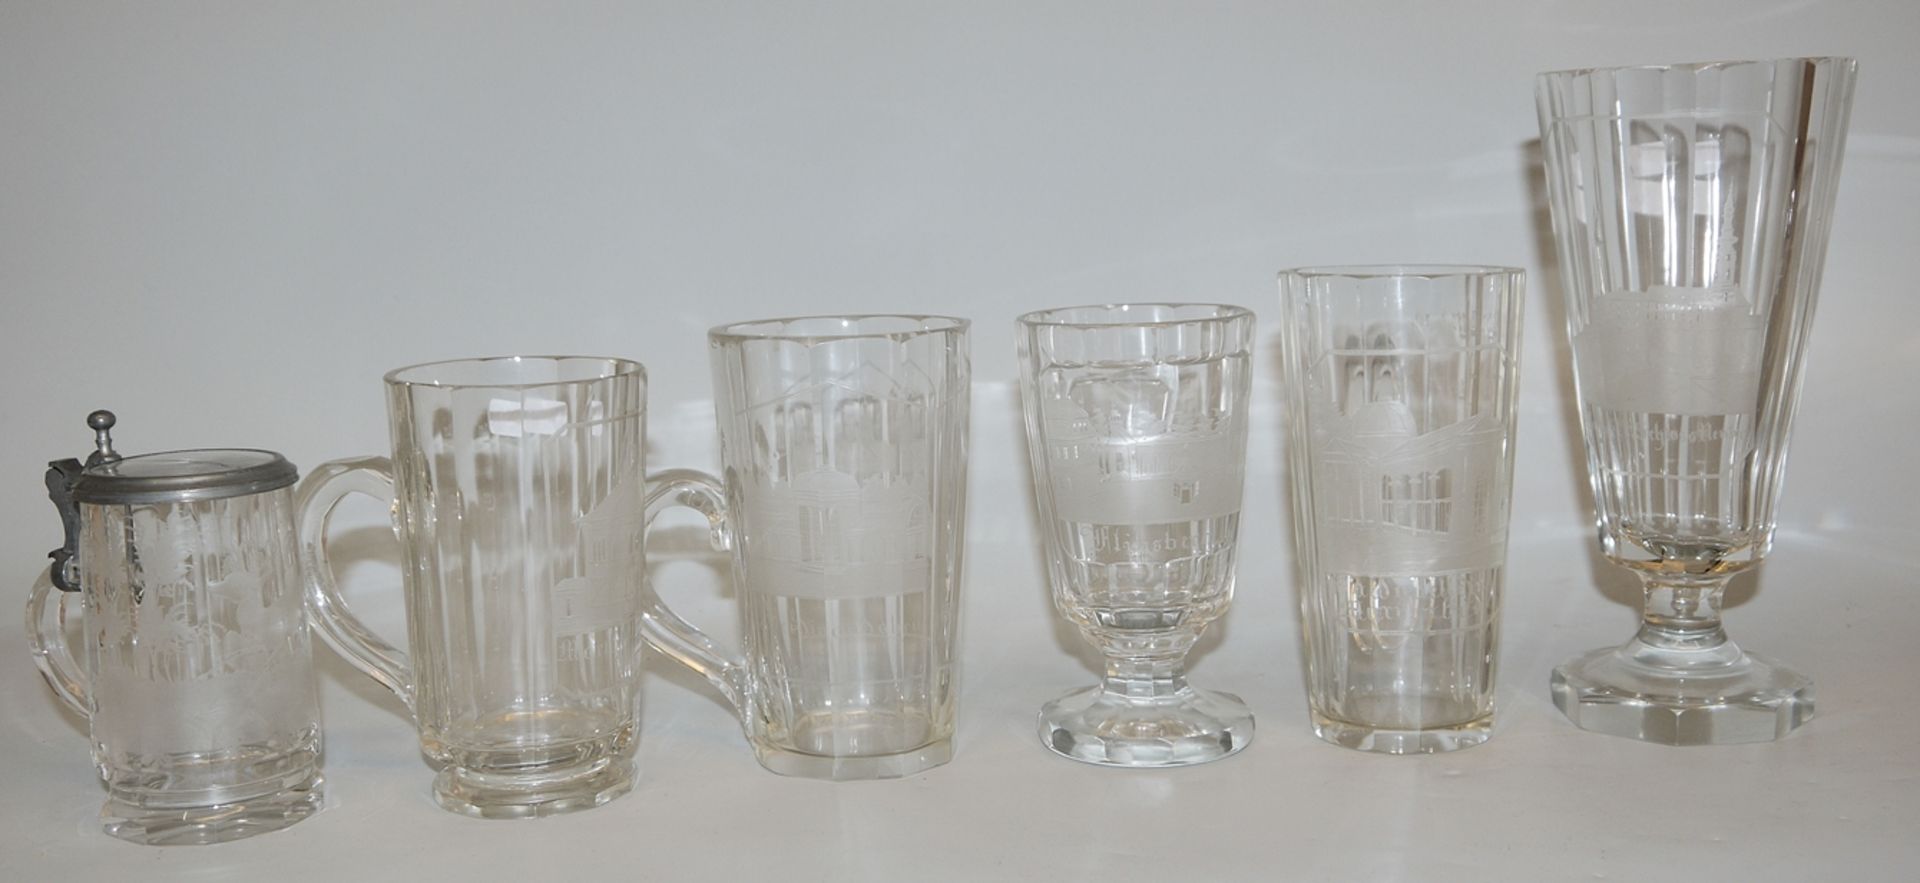 12 view and spa glasses, Bohemia, 1840-80 - Image 2 of 3